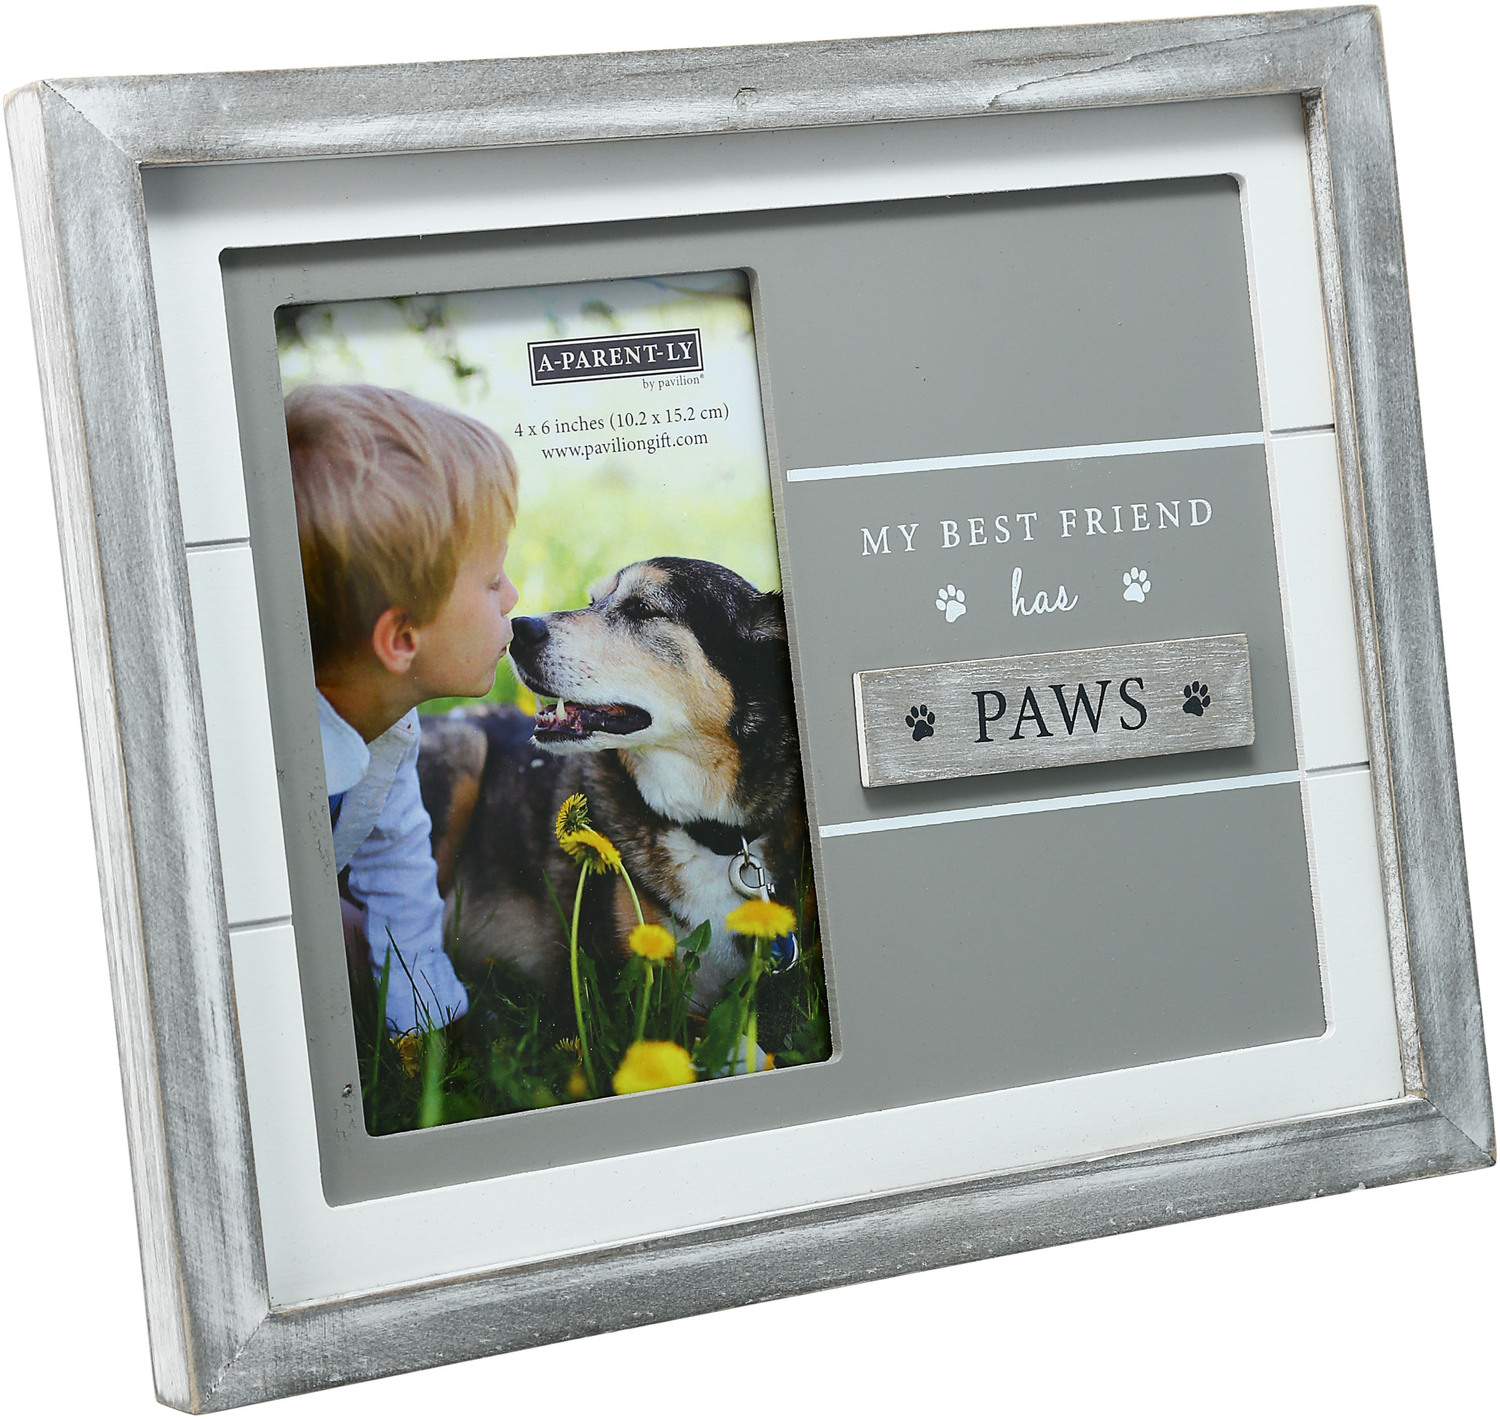 Pet by A-Parent-ly - Pet - 9.75" x 8.25" Frame (Holds 4" x 6" Photo)